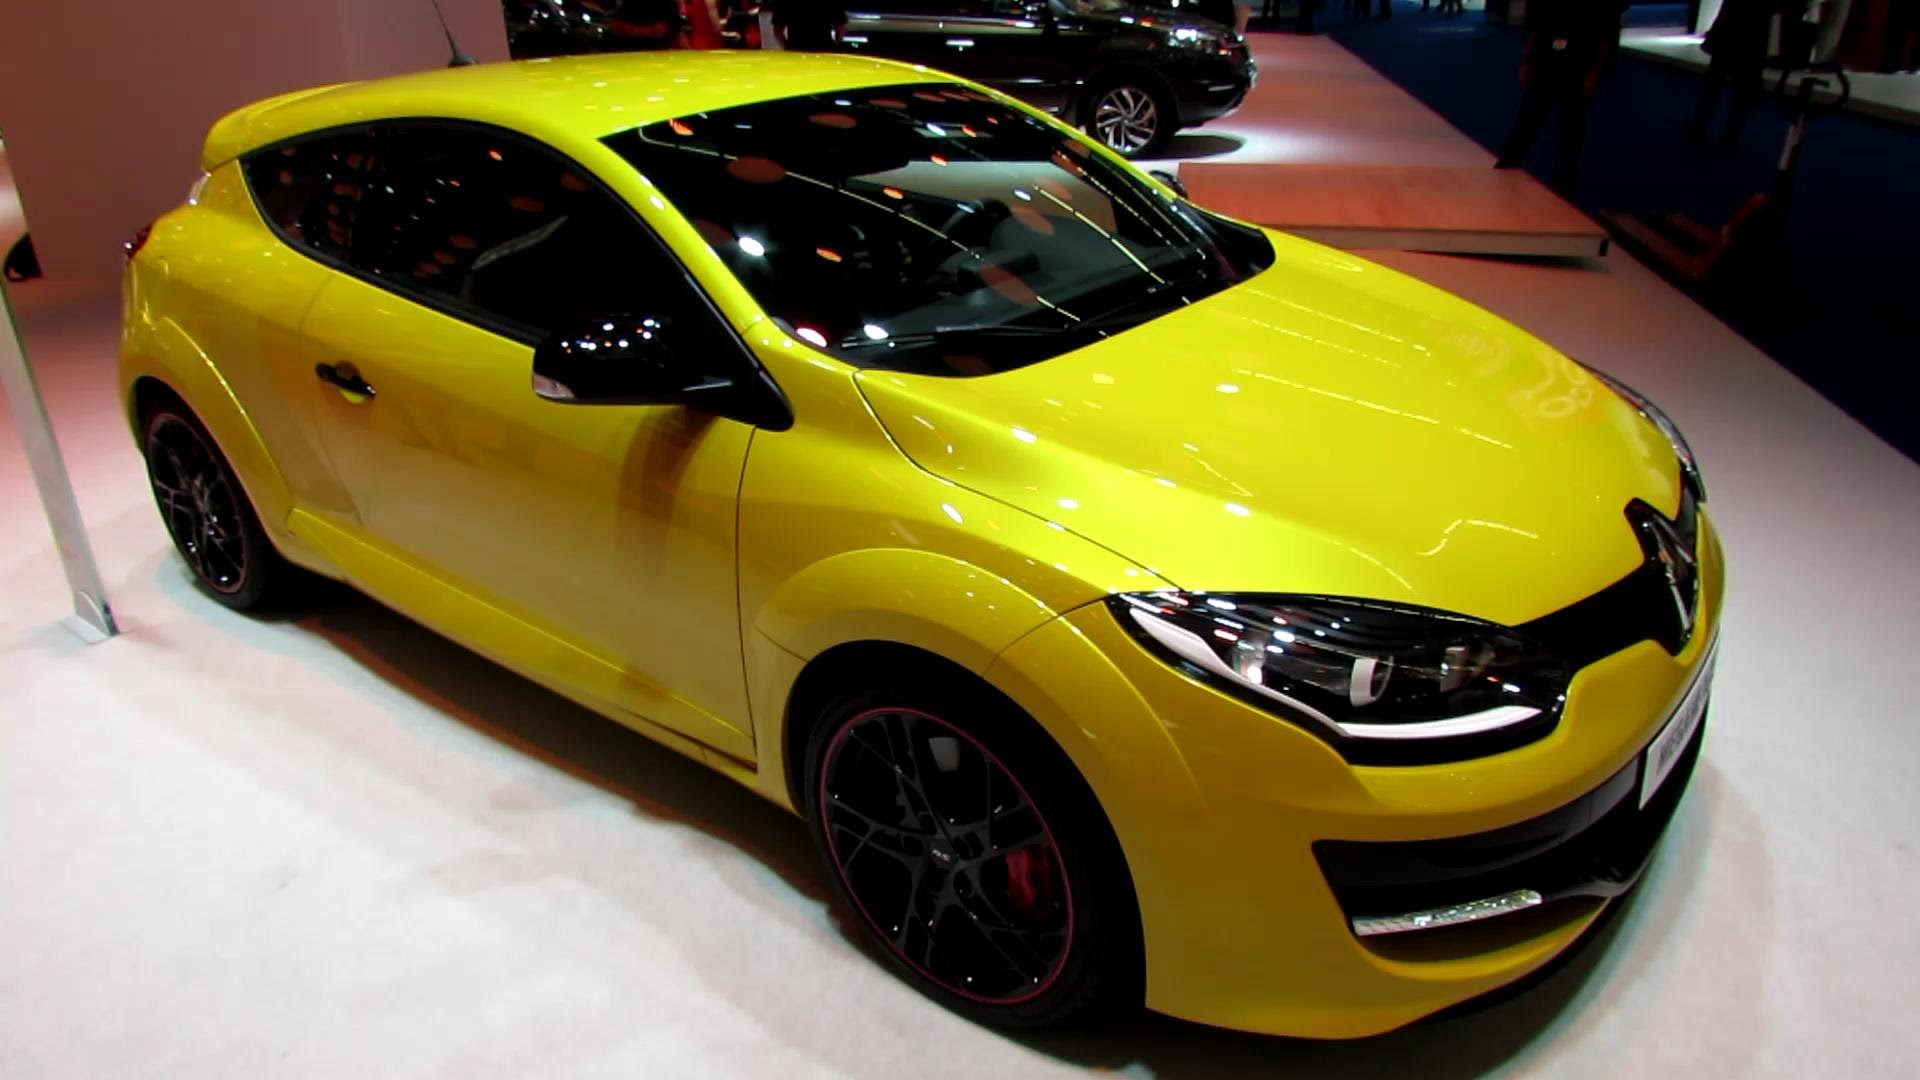 Images of 2014 Renault Mégane RS | 1920x1080